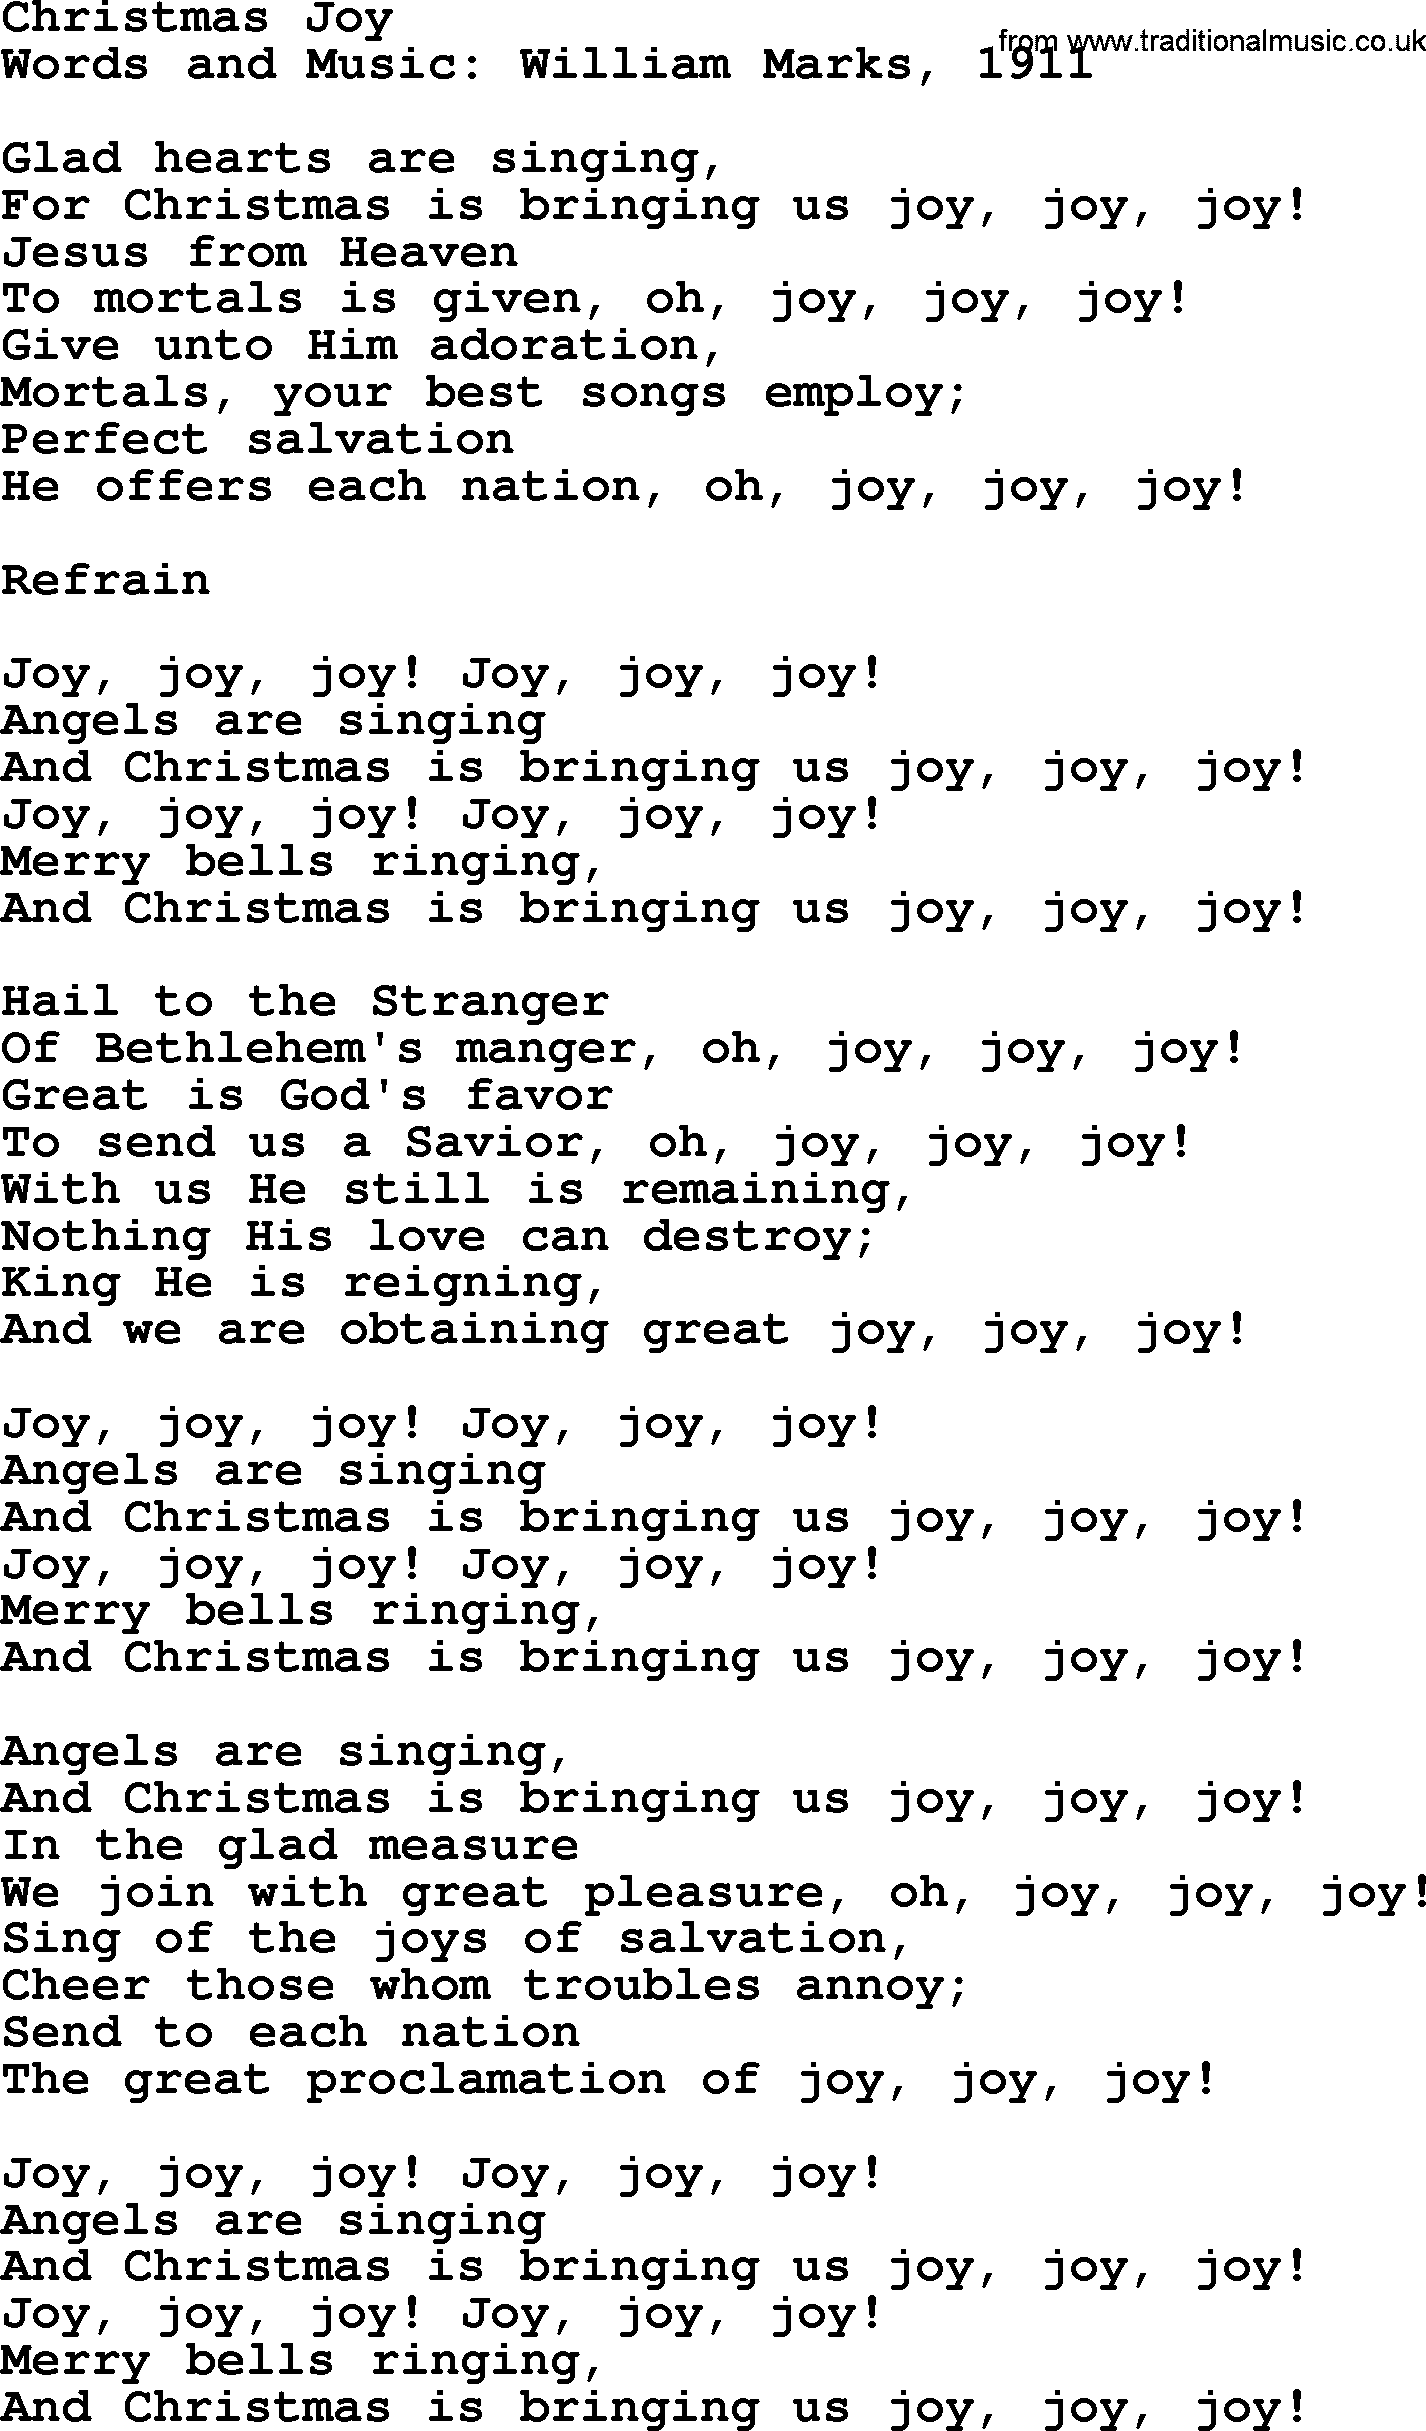 Christmas Powerpoints, Song: Christmas Joy - Lyrics, PPT(for church projection etc) and PDF